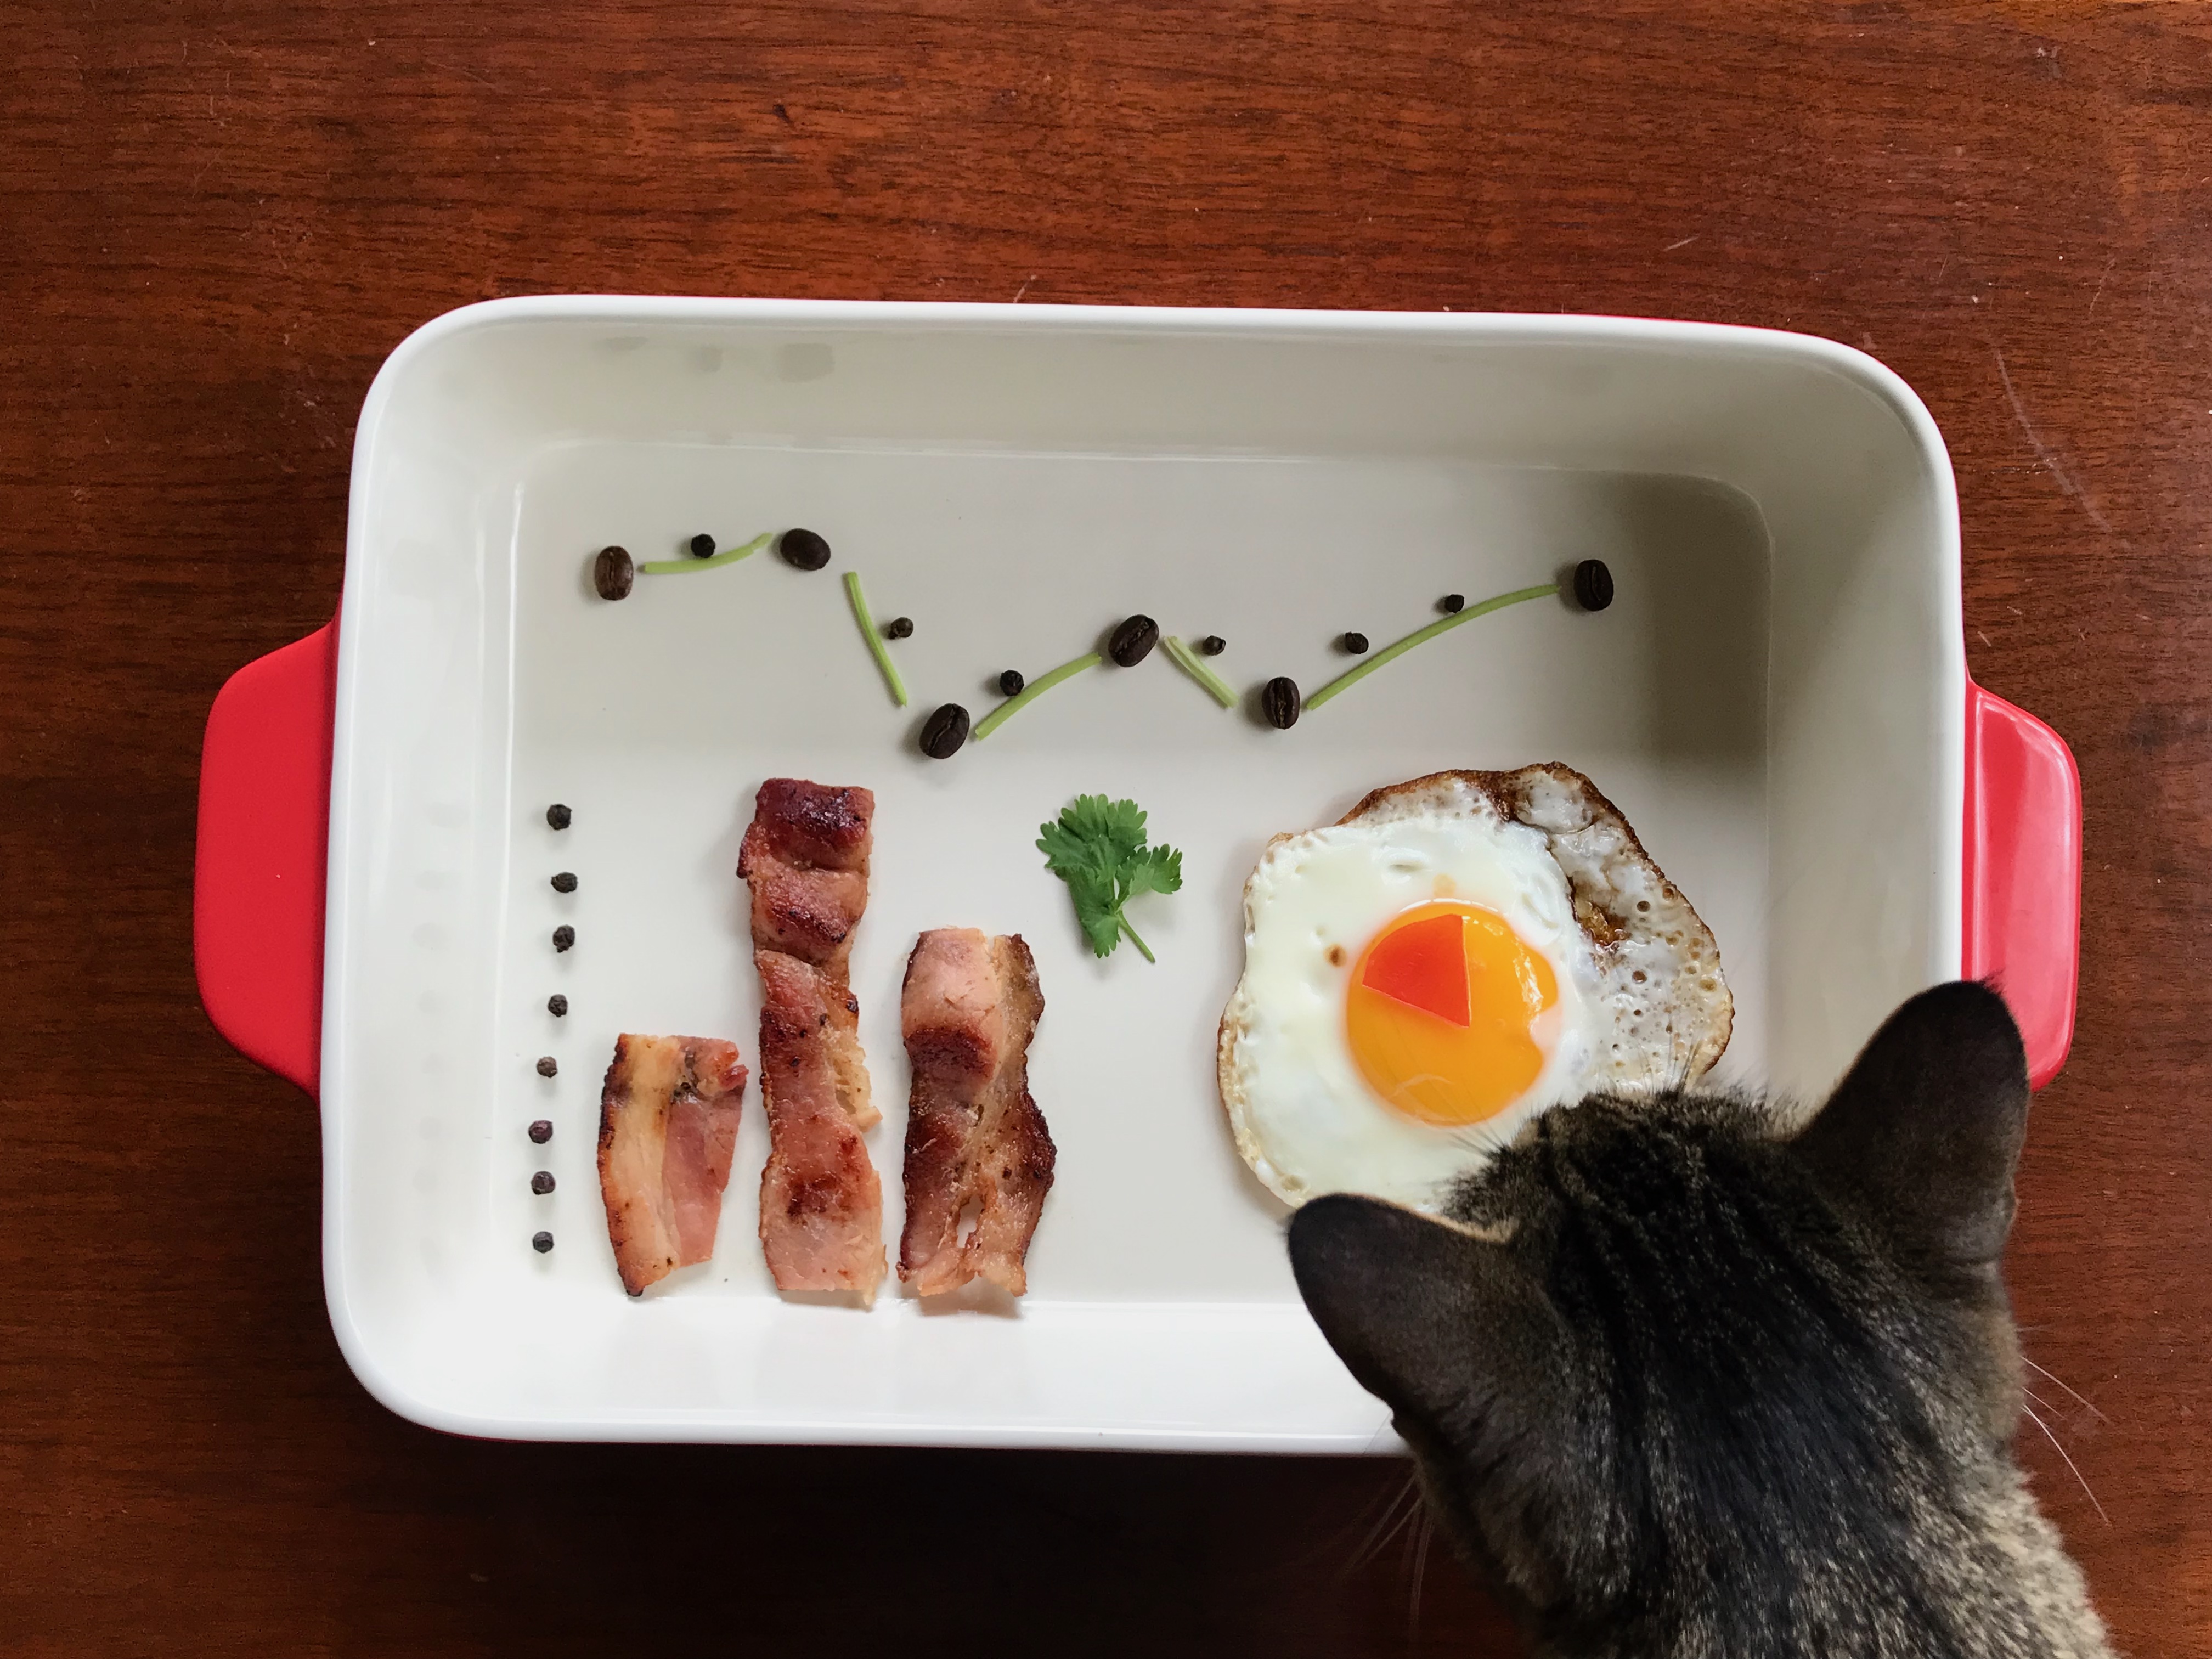 A casserole dish with bacon, an over-easy egg, and a trail of raisins designed to look like different types of graphs. A cat looks in the dish.